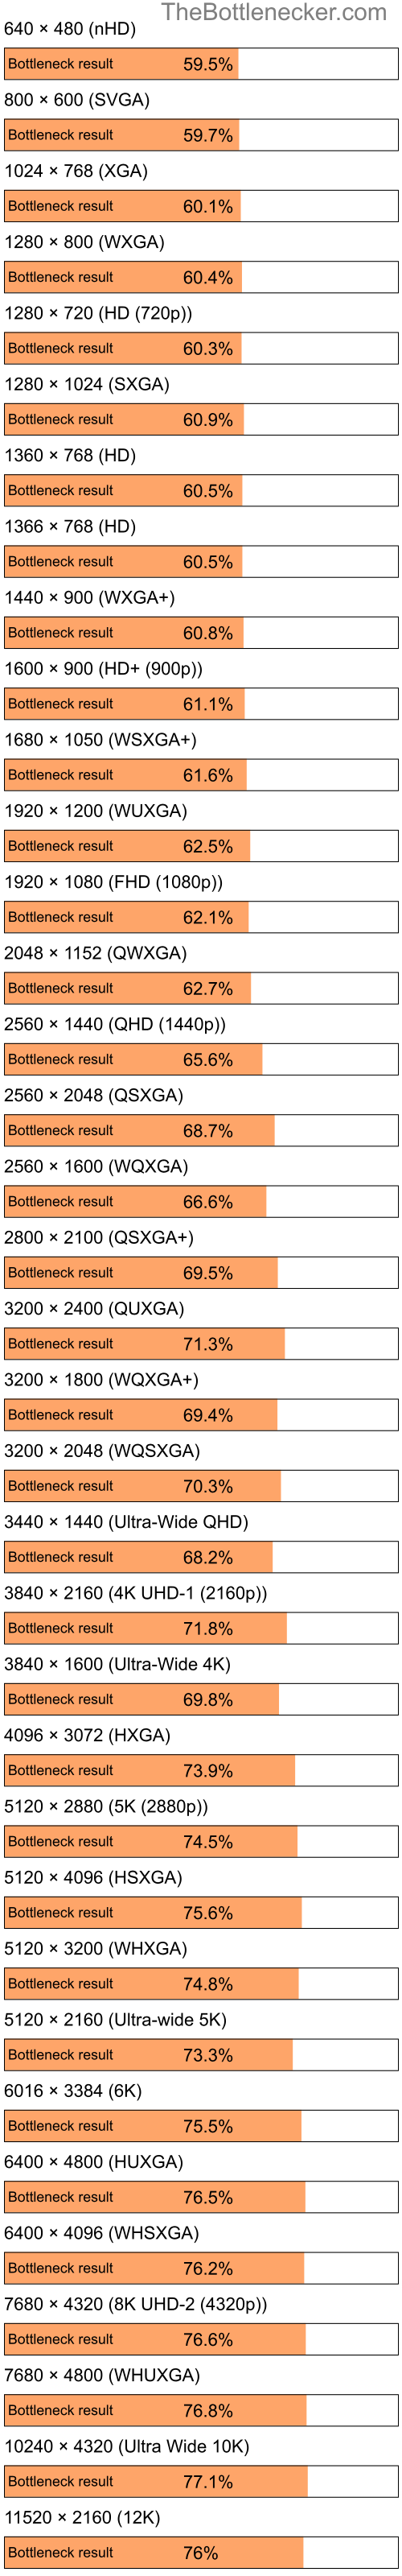 Bottleneck results by resolution for Intel Atom Z520 and NVIDIA Quadro NVS 140M in Processor Intense Tasks